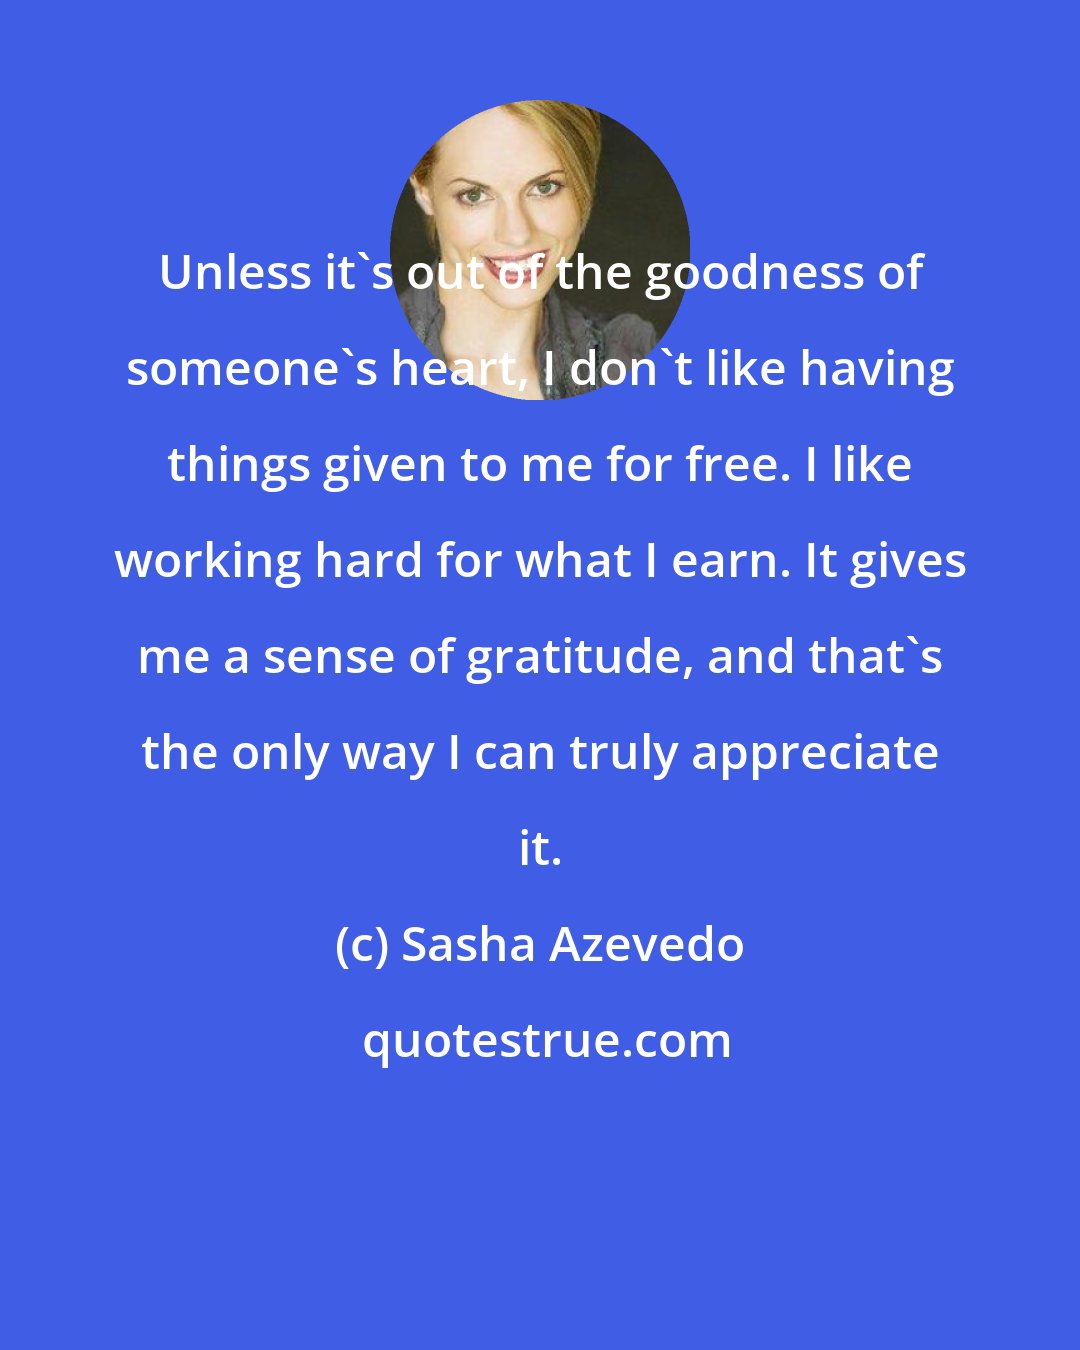 Sasha Azevedo: Unless it's out of the goodness of someone's heart, I don't like having things given to me for free. I like working hard for what I earn. It gives me a sense of gratitude, and that's the only way I can truly appreciate it.